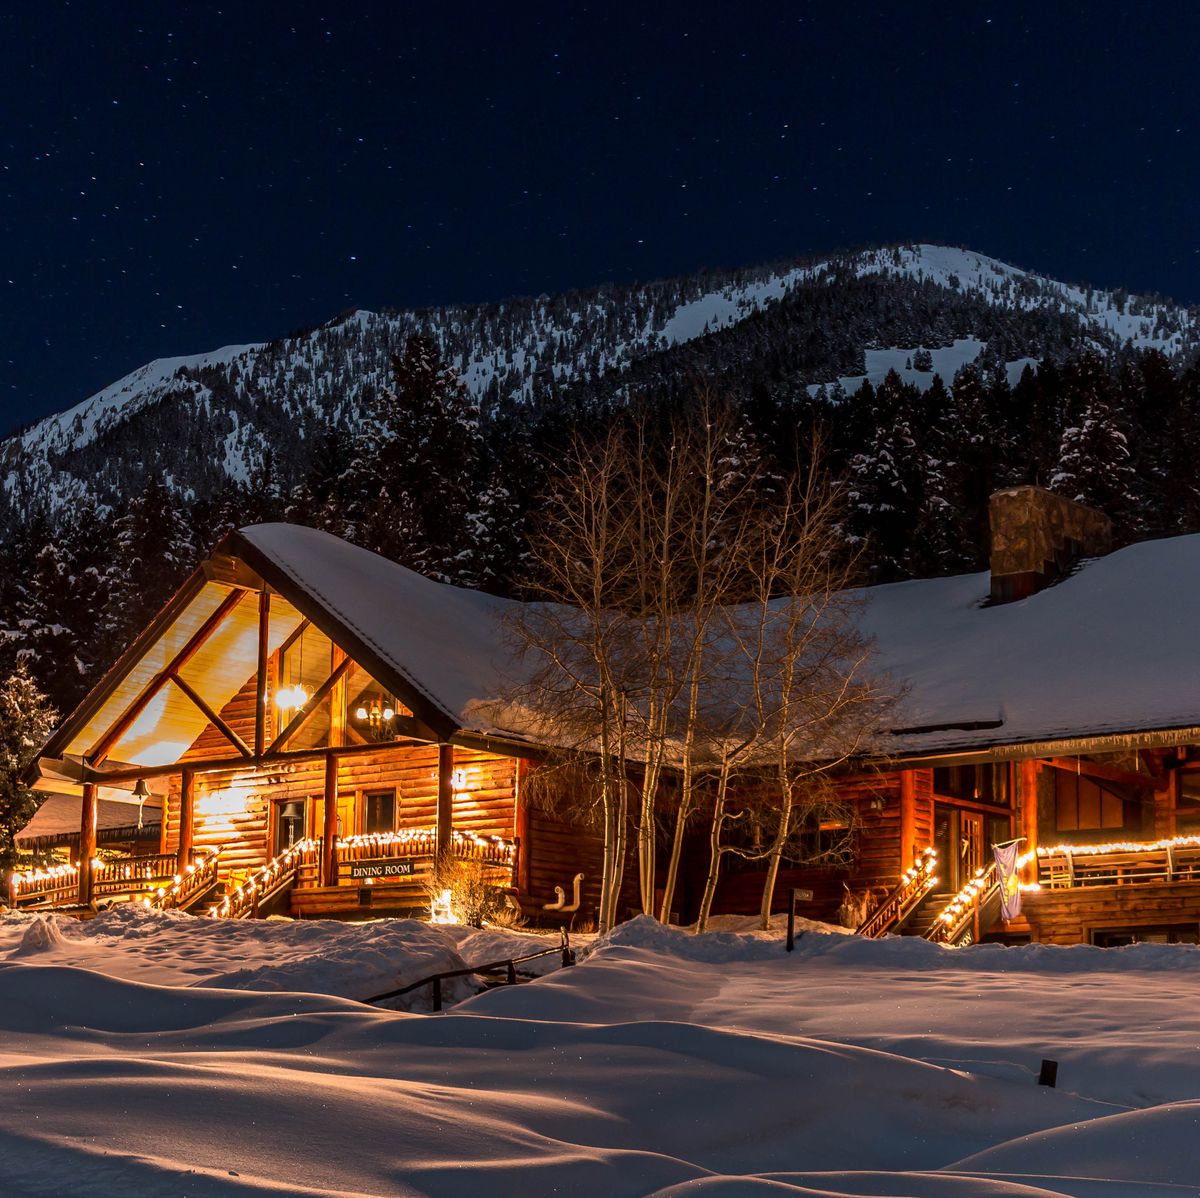 25 Cozy Winter Cabin Rentals and Mountain Getaways in the US